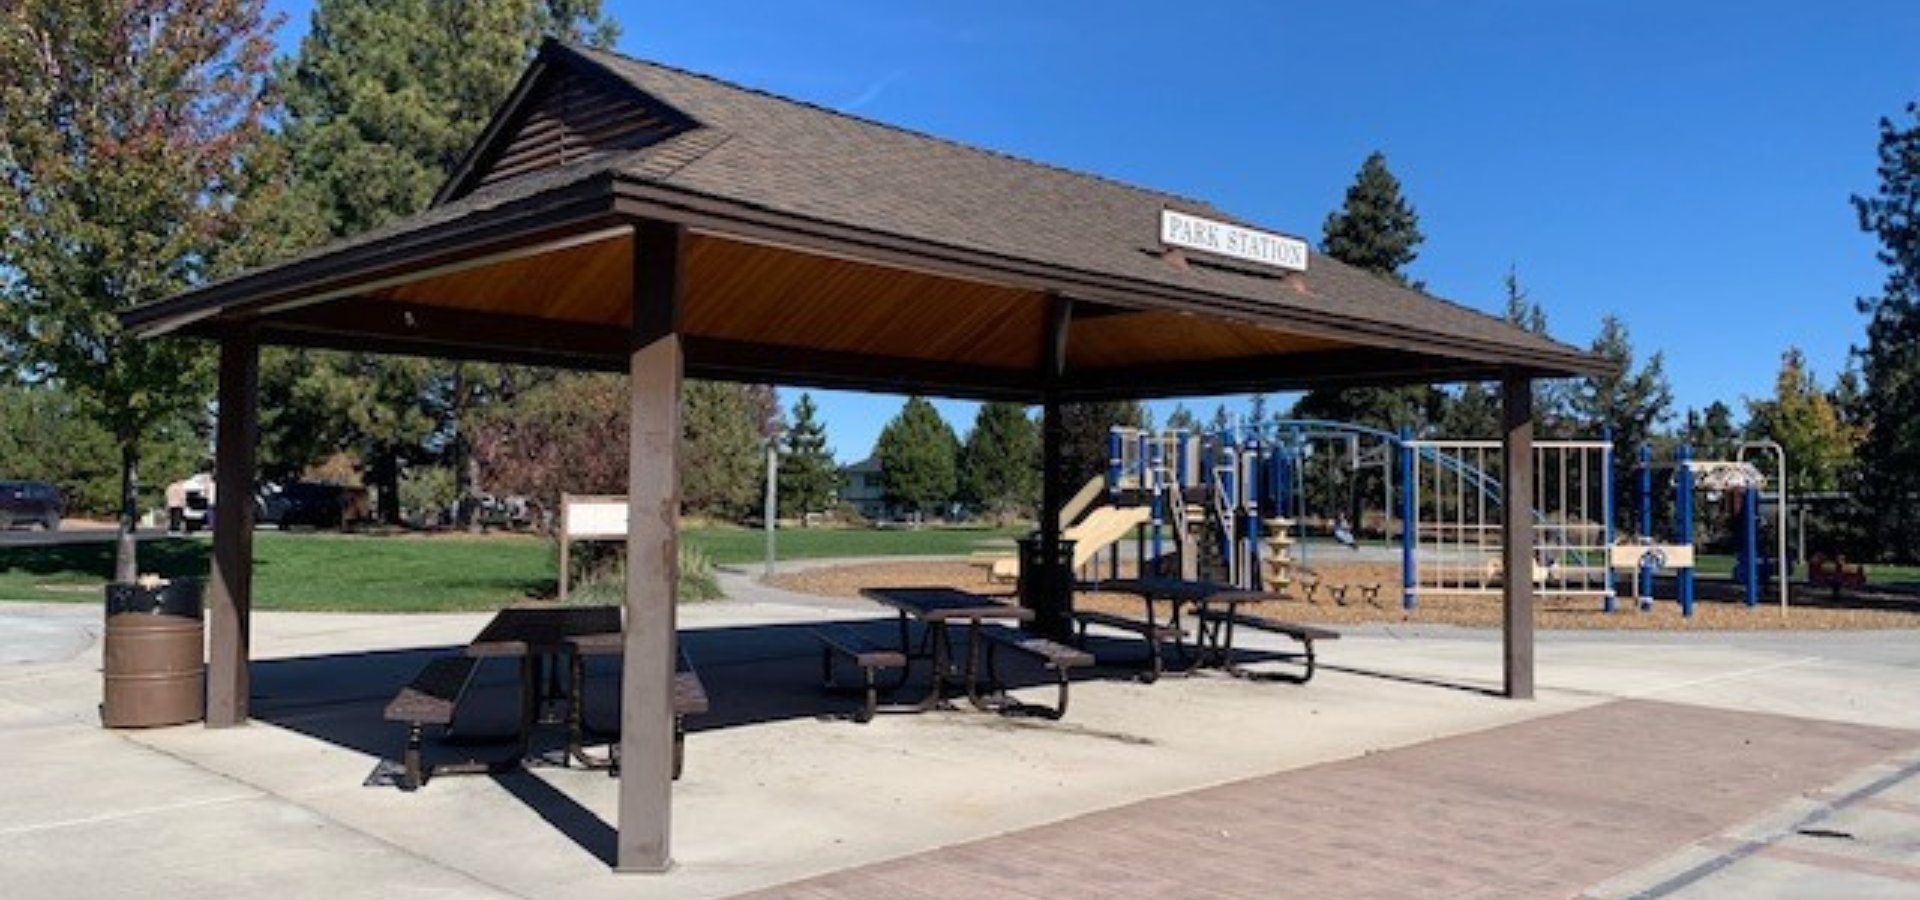 the picnic shelter at Kiwanis park in the sunlight, playground in the background